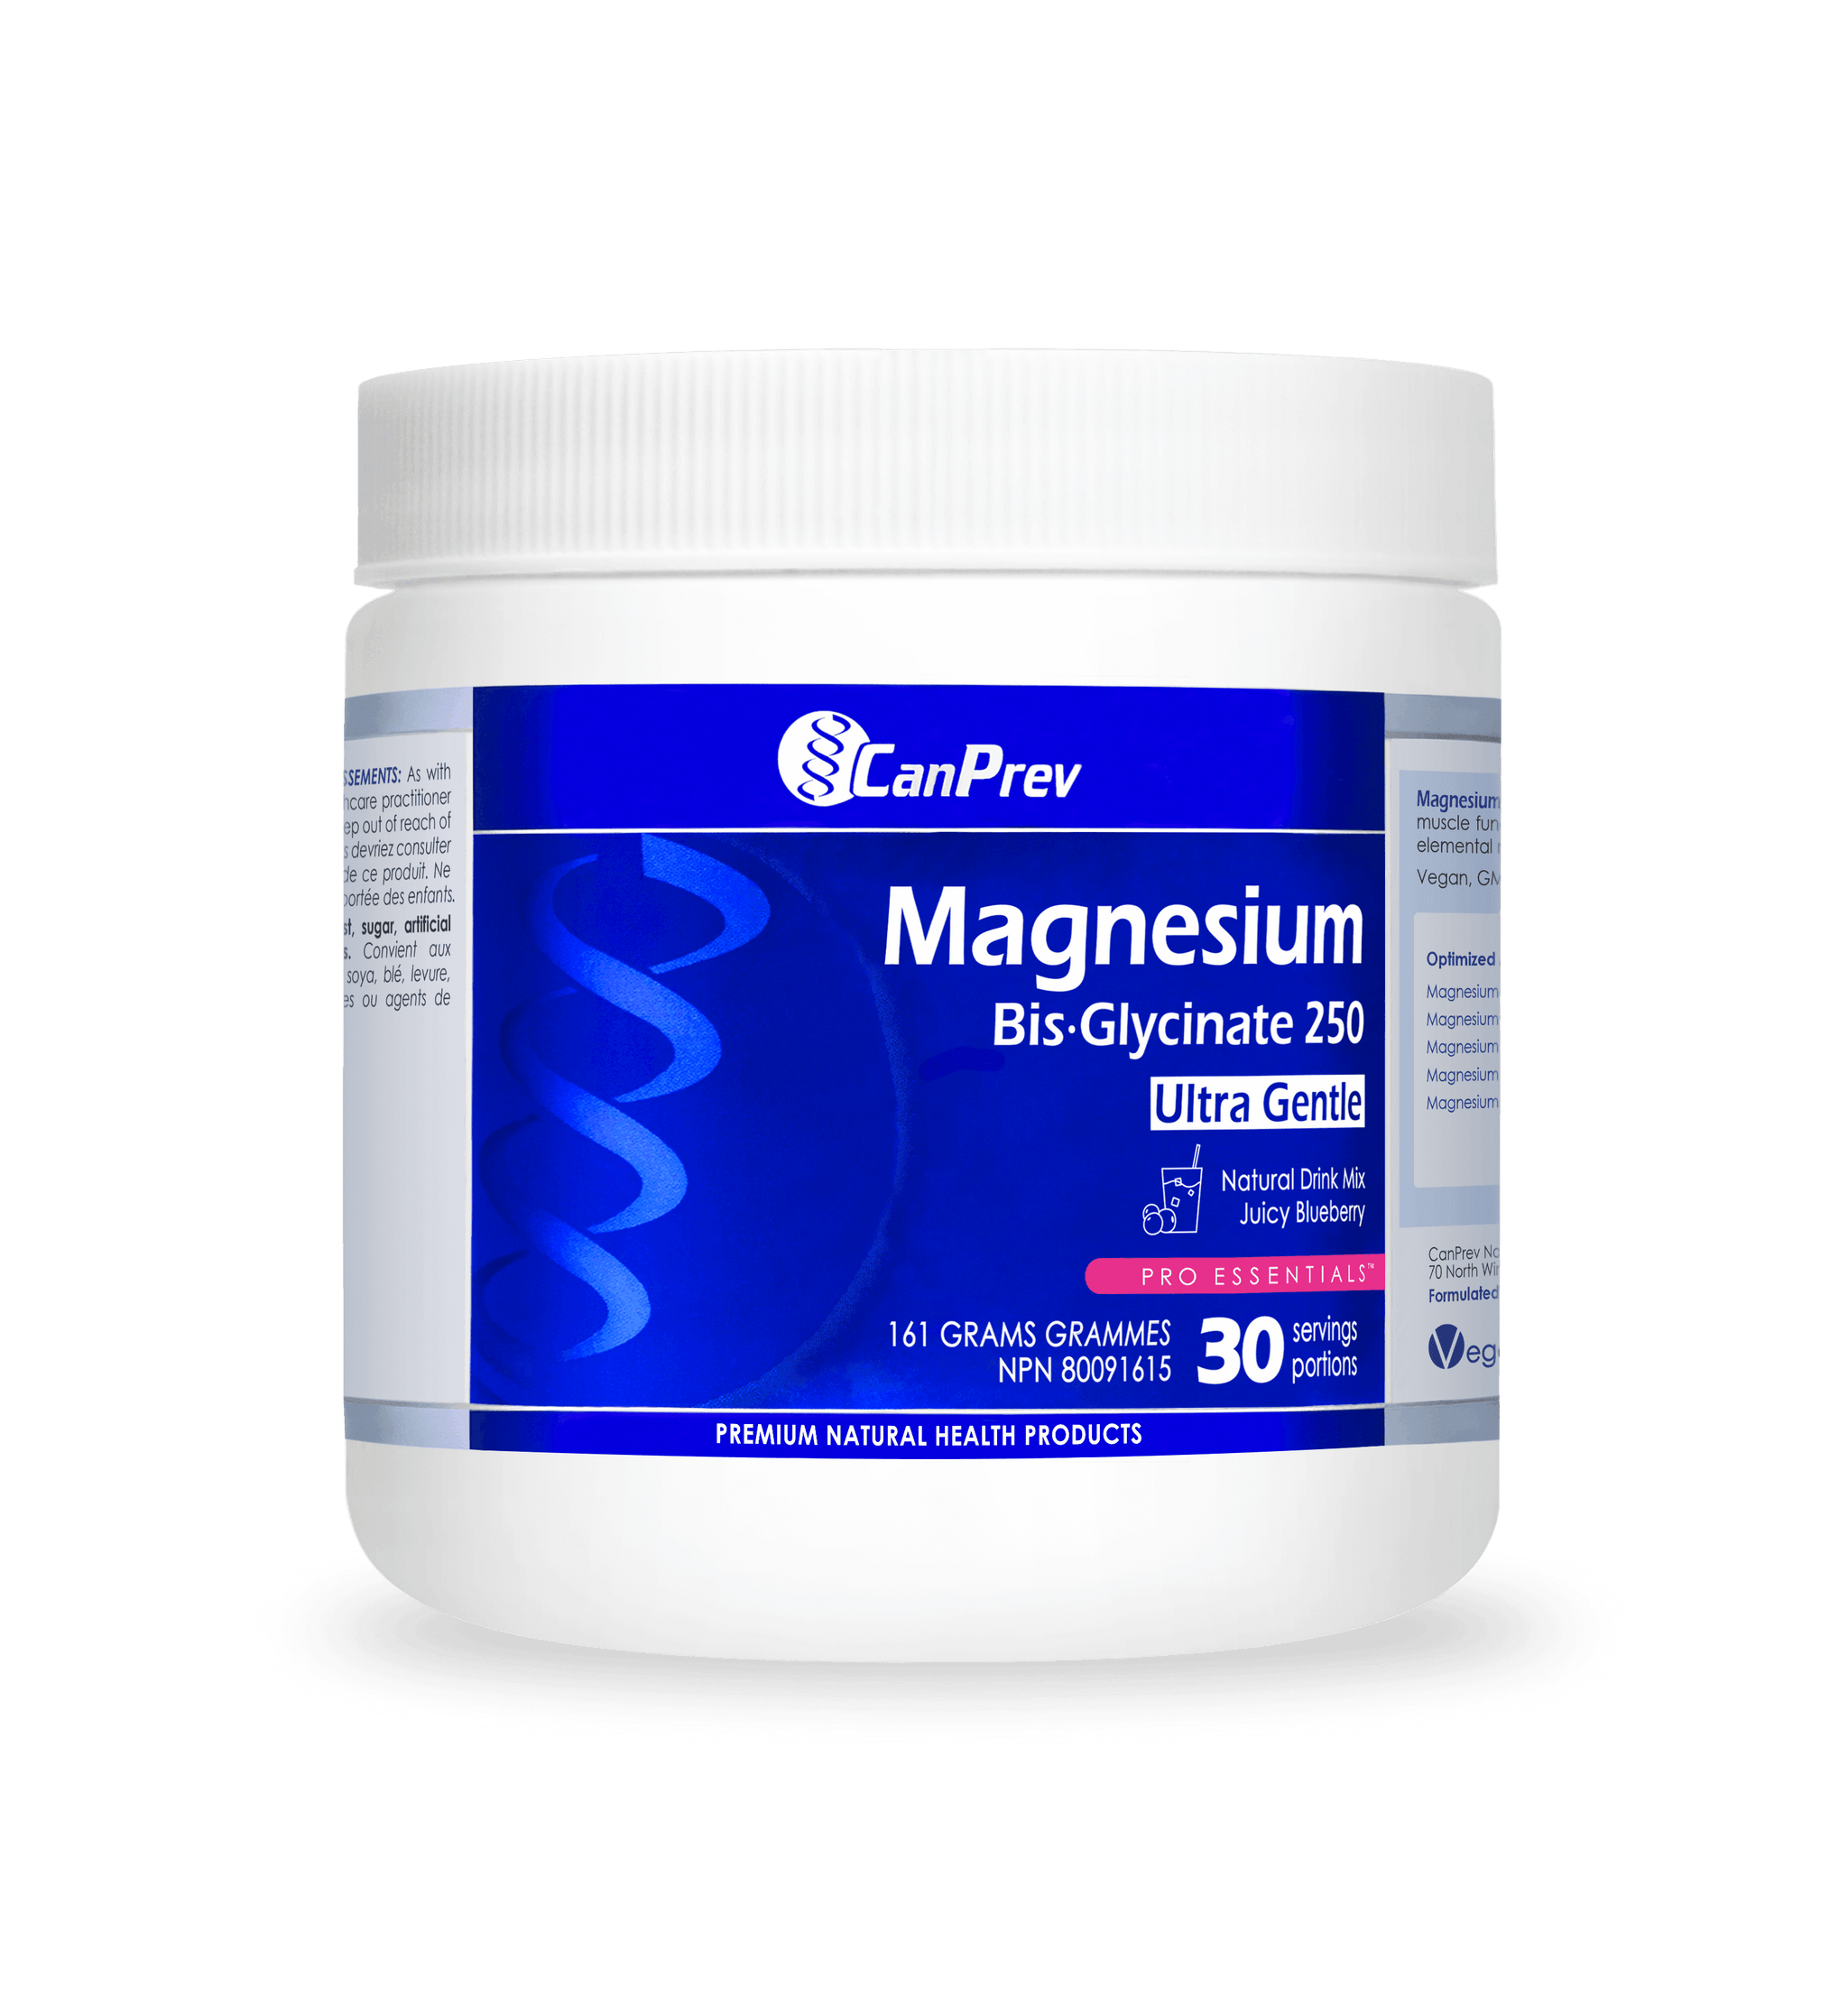 CanPrev Magnesium Bis-Glycinate 250 Juicy Blueberry 161g